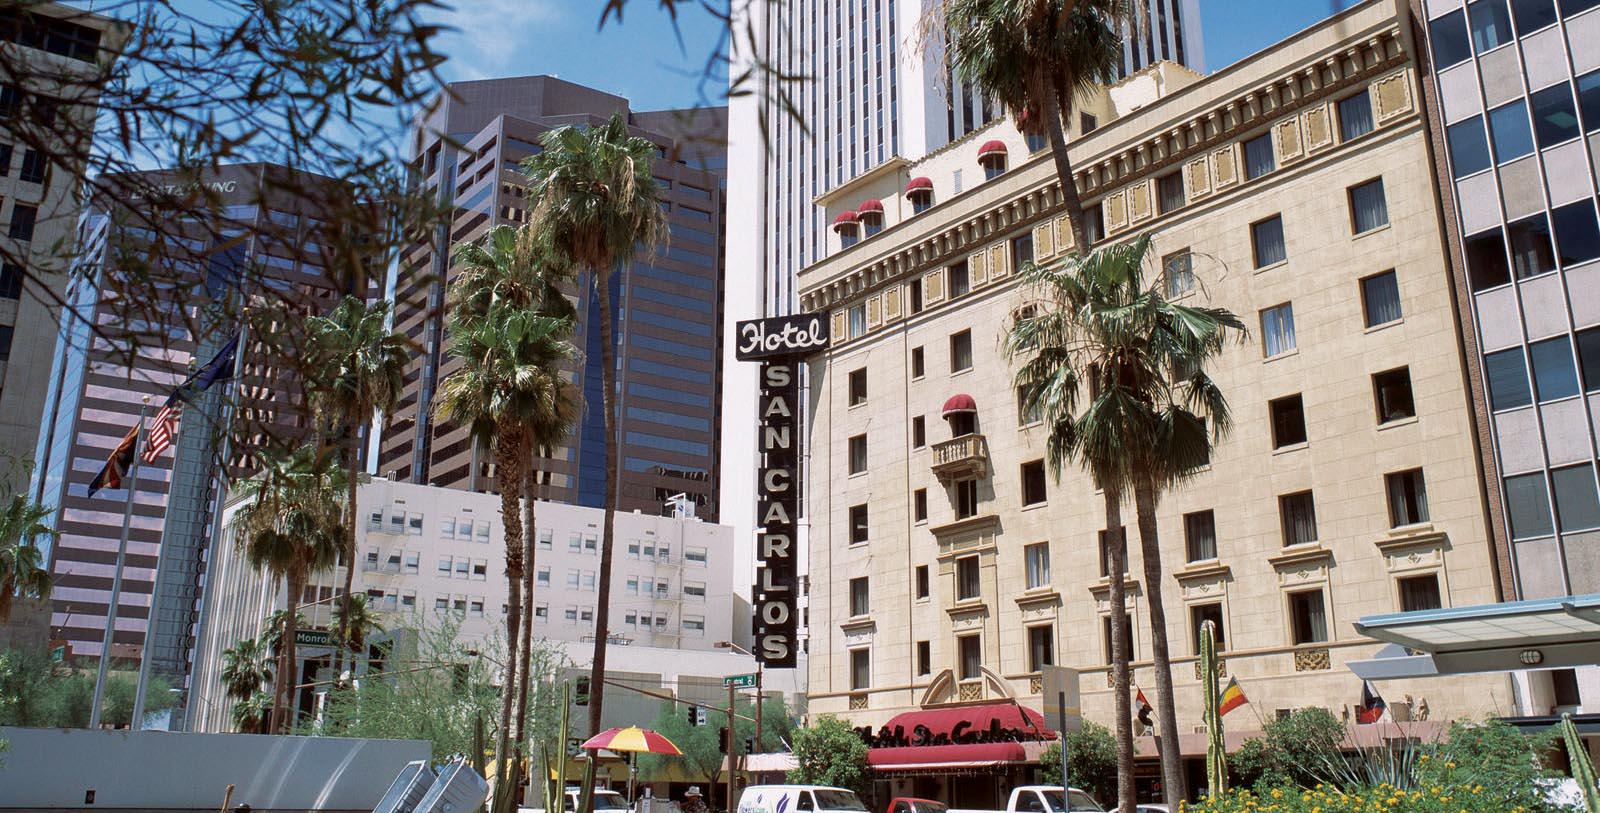 Image of Exterior, Hotel San Carlos in Phoenix Arizona, 1928, Member of Historic Hotels of America, Special Offers, Discounted Rates, Families, Romantic Escape, Honeymoons, Anniversaries, Reunions